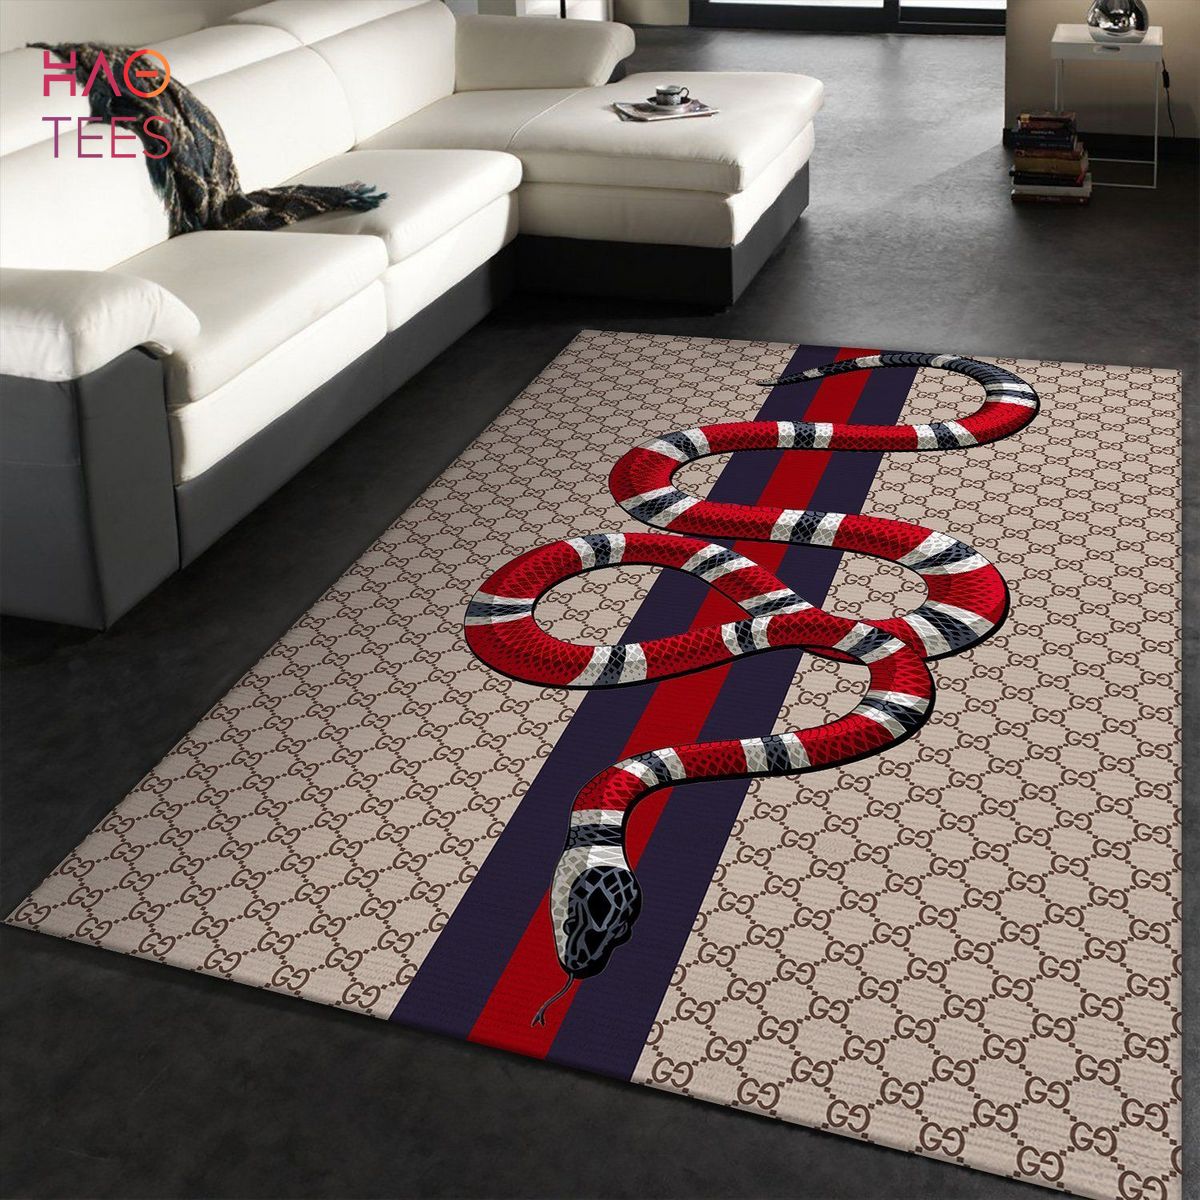 Gucci Snake Red Blue Area Rugs Living Room Carpet